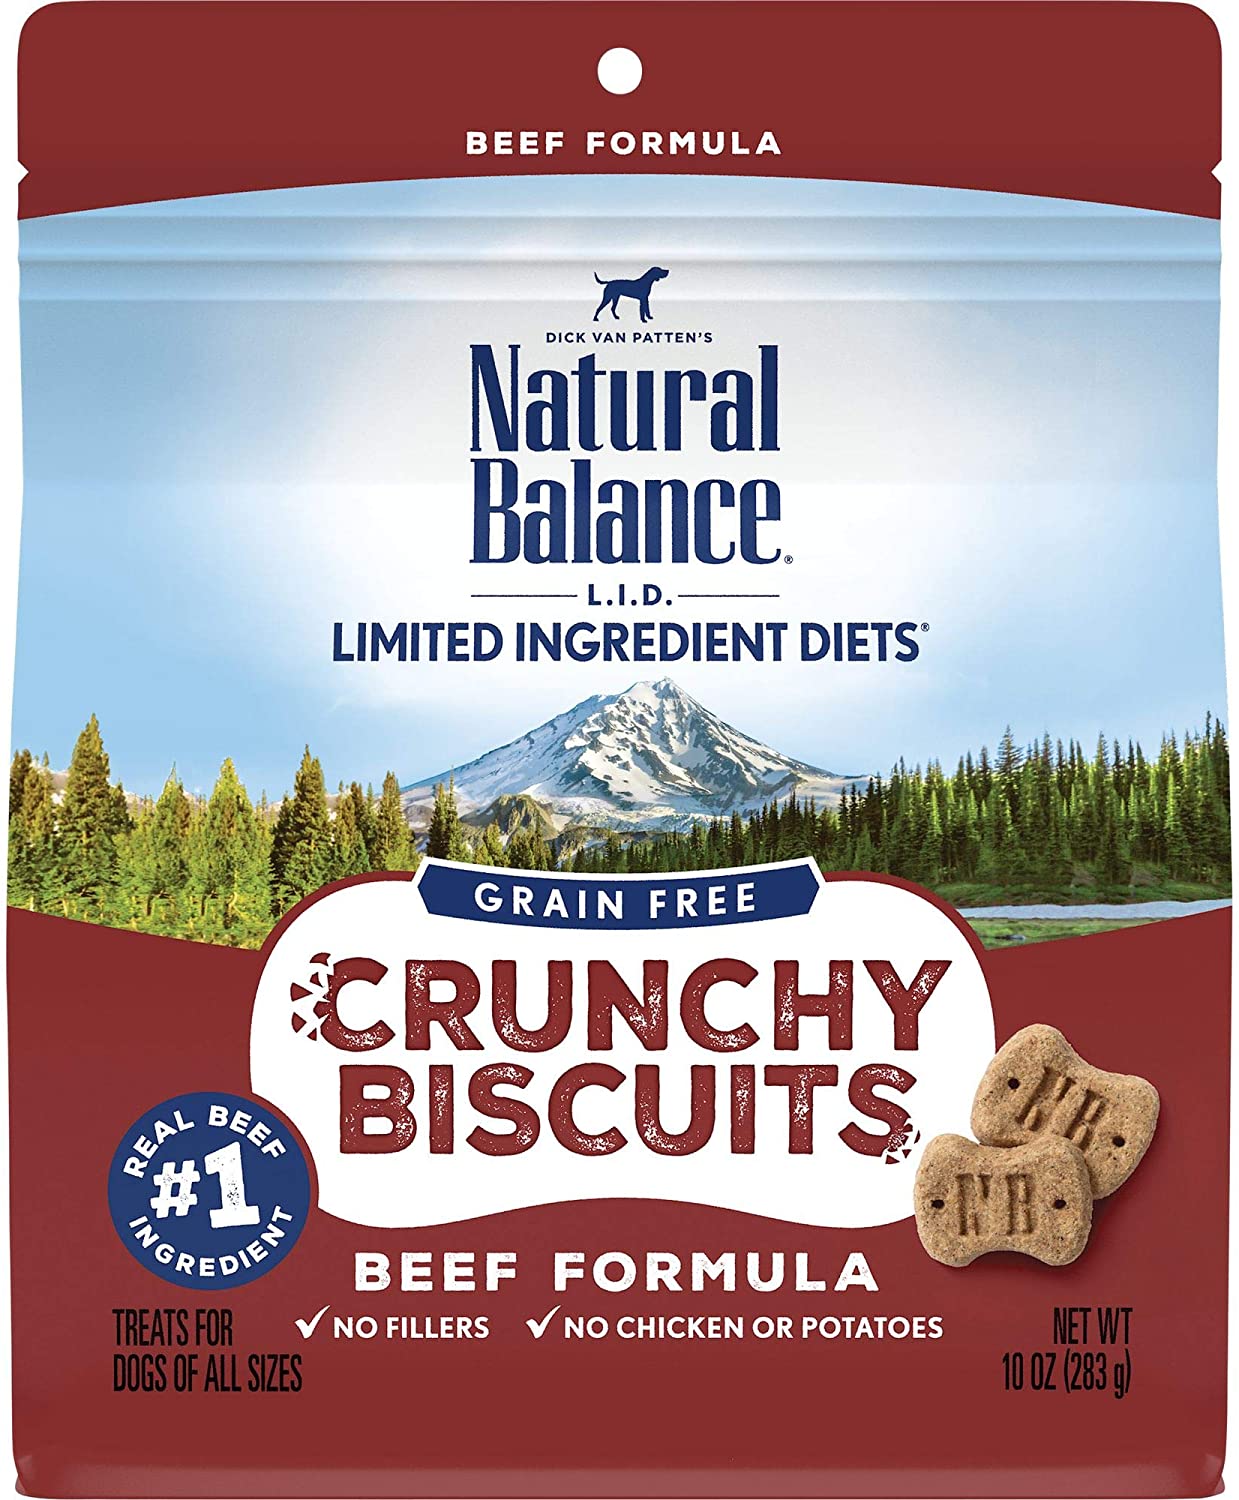 10-Oz Natural Balance L.I.D. Crunchy Biscuits Beef Formula Dog Treats $1.40 + Free Shipping w/ Amazon Prime or Orders $25+